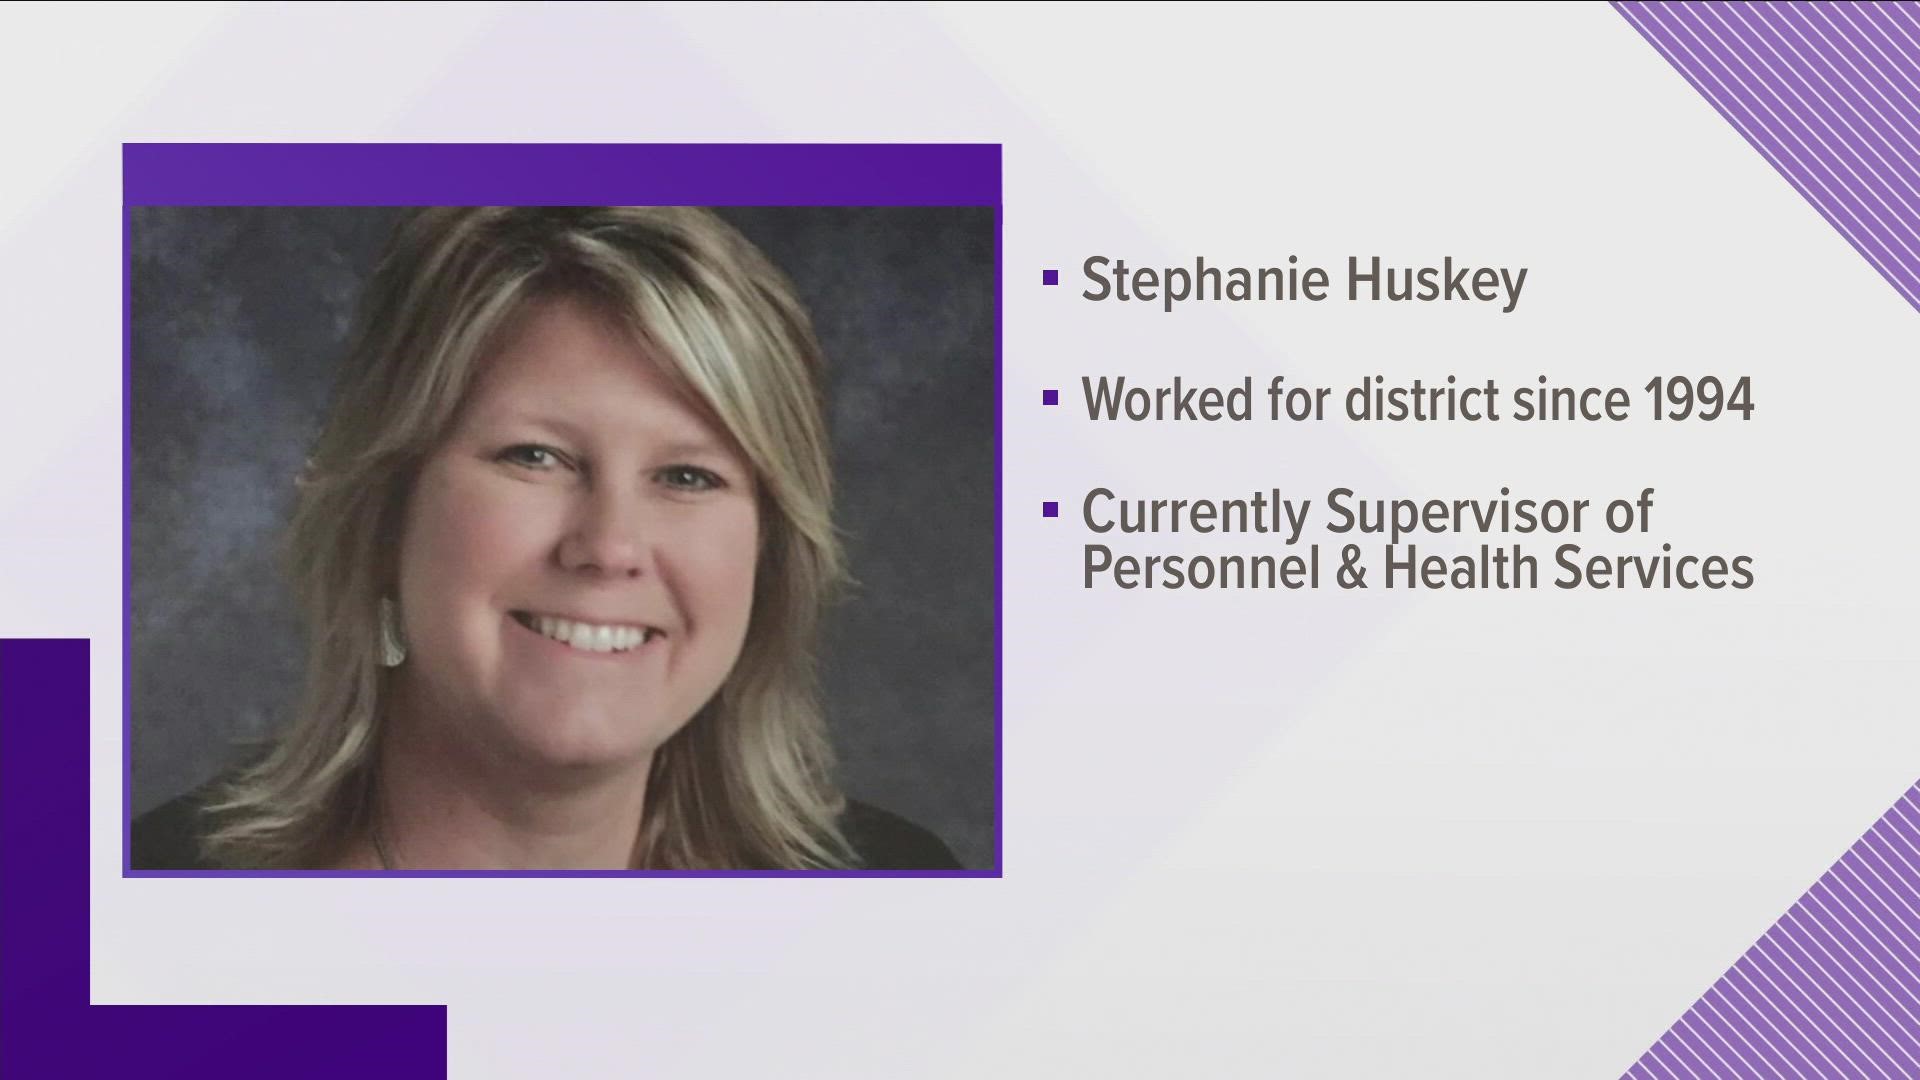 Officials said that Stephanie Huskey has been employed with Sevier County Schools since 1994, making her a 27-year veteran educator.